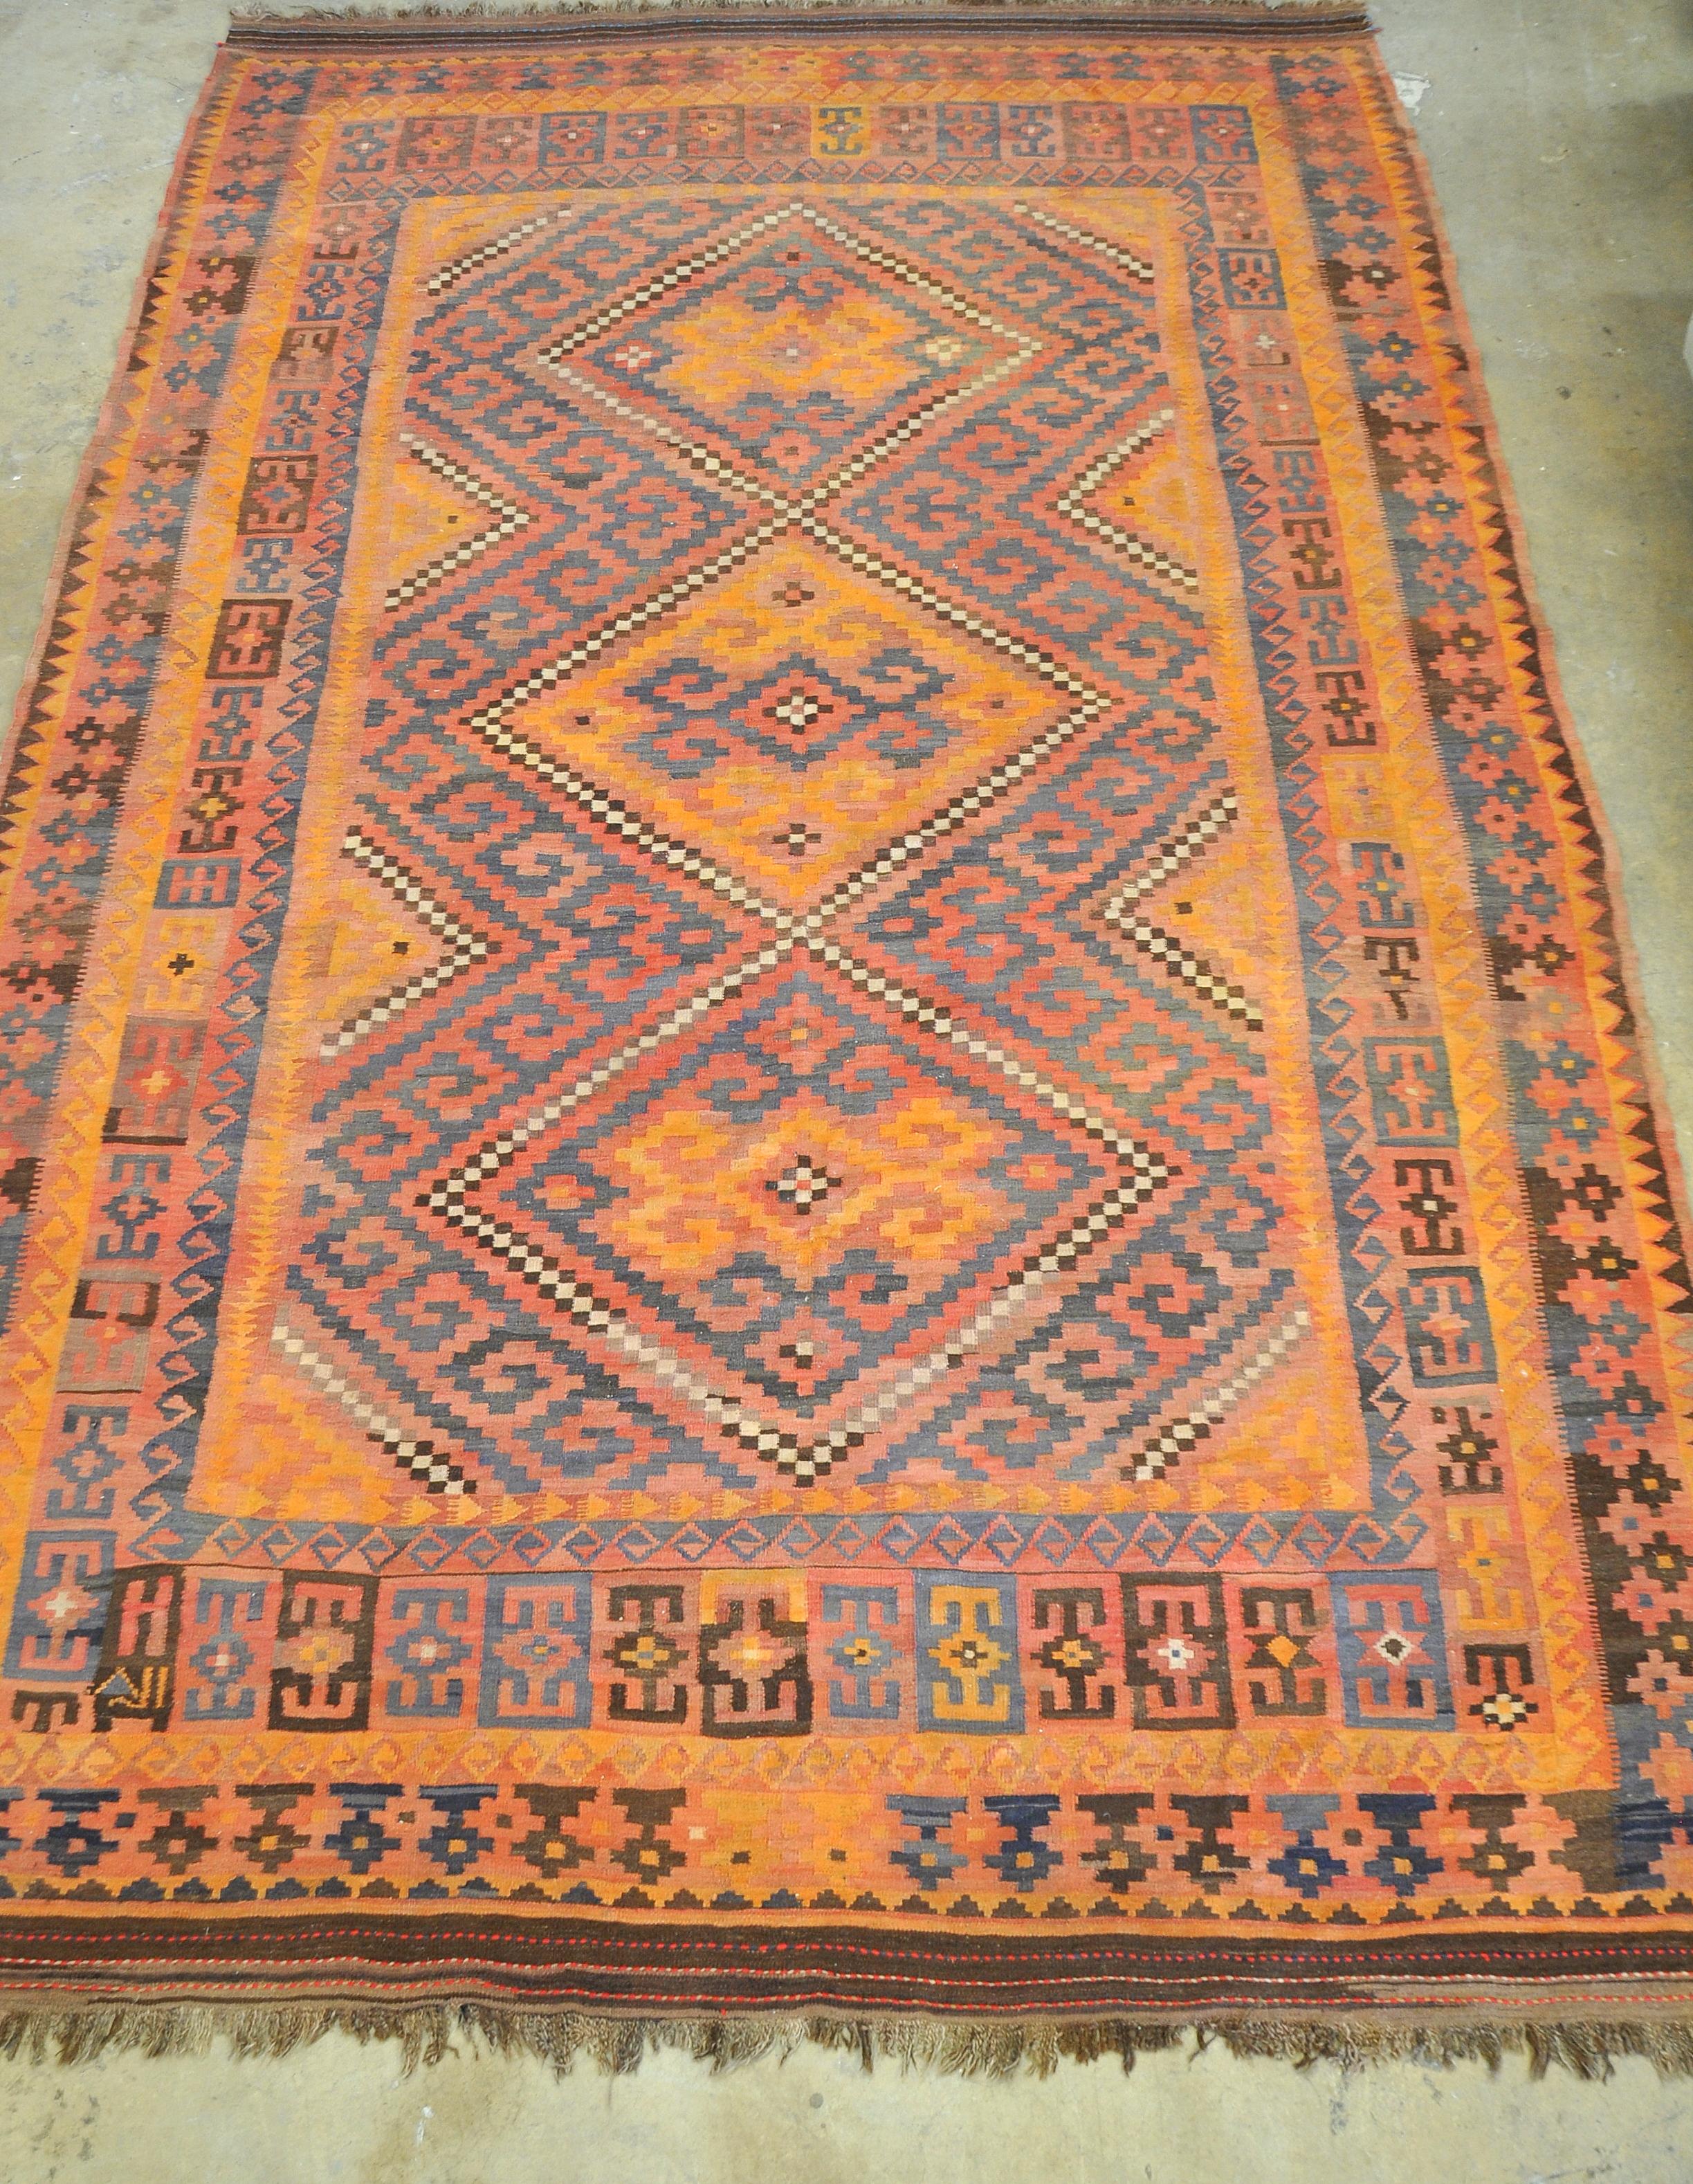 An approximately 16 x 10 handwoven Kilim rug made of vegetable dyed hand spun wool. A peachy pastel pink background features yellow, blue, off-white, gray and brown geometric and tribal motifs. Works well with Danish, Scandinavian, Mid-Century